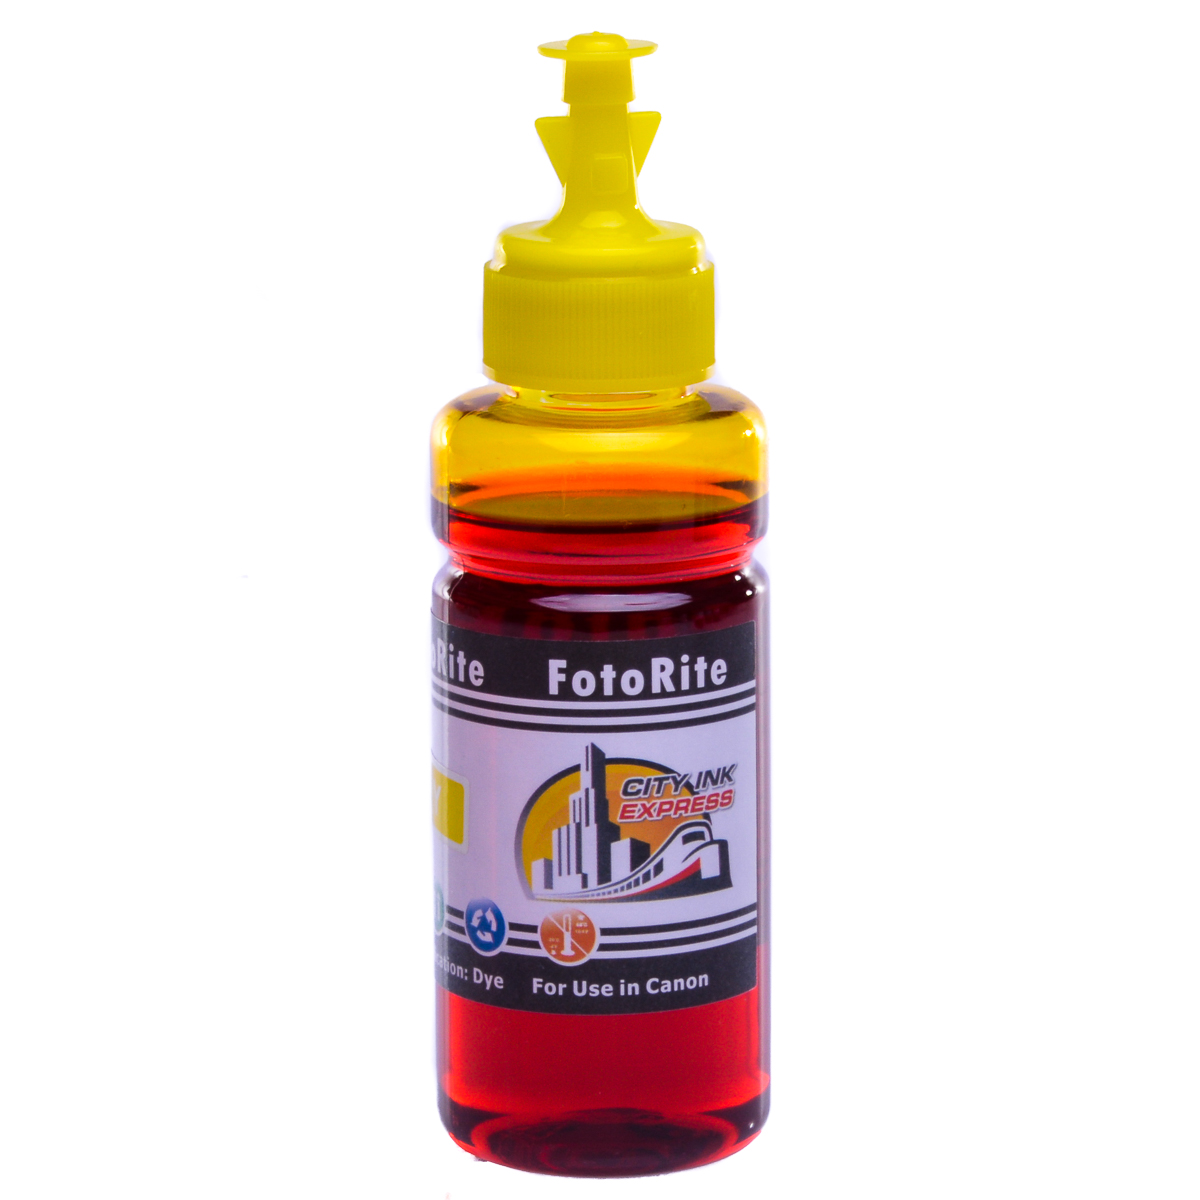 Cheap Yellow dye ink replaces Canon Pixma IP8750 - CLI-551Y